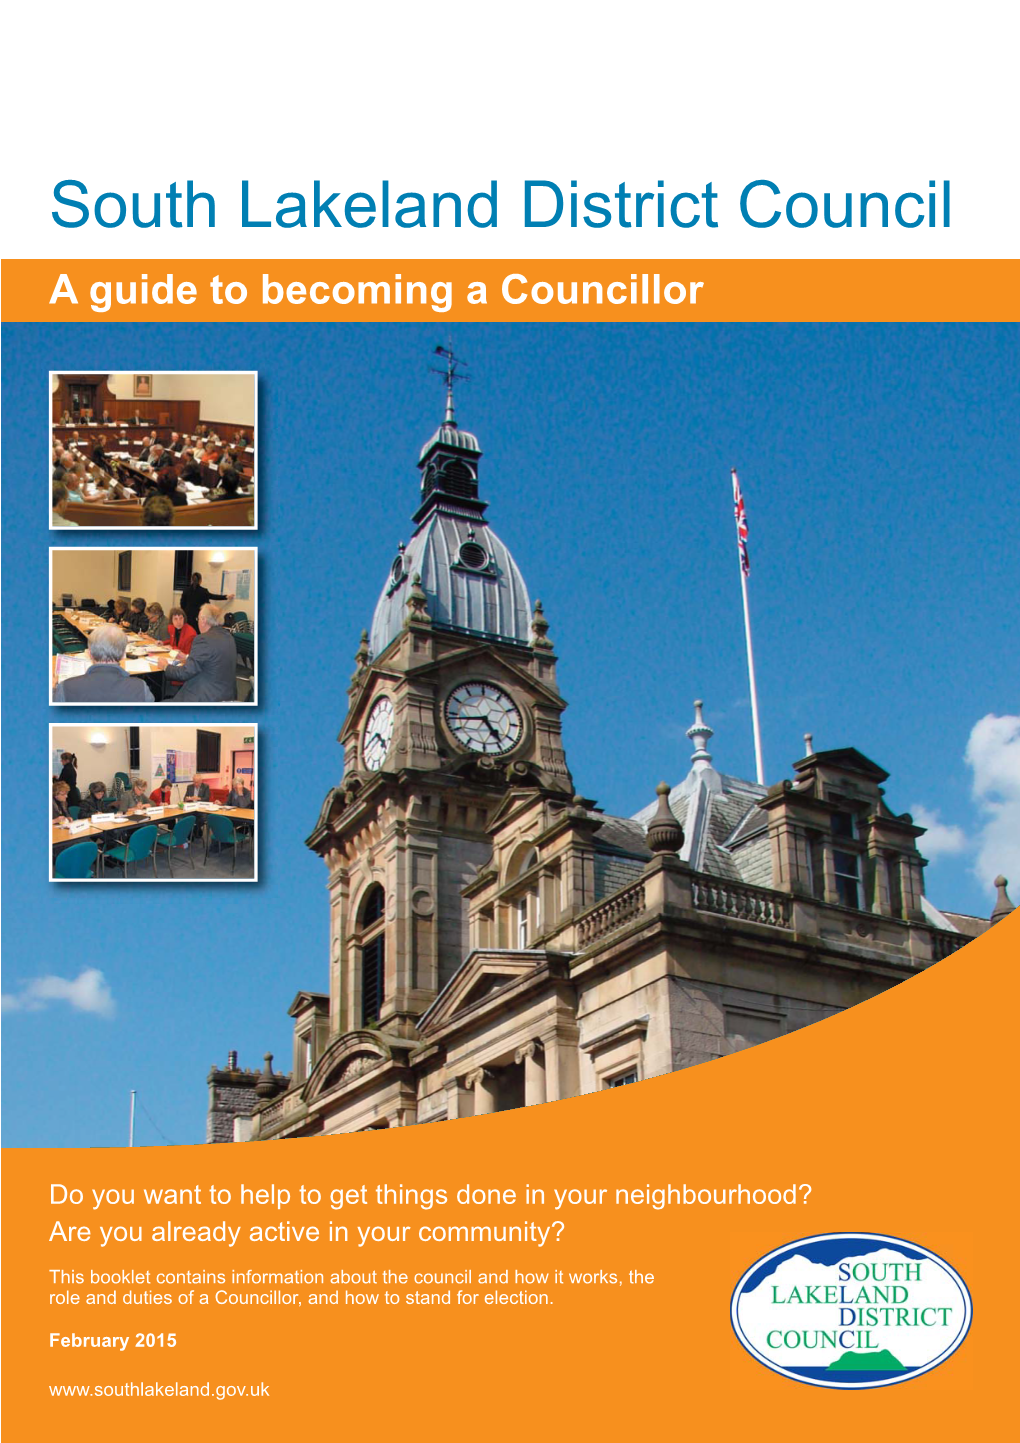 SLDC Guide to Becoming a Councillor